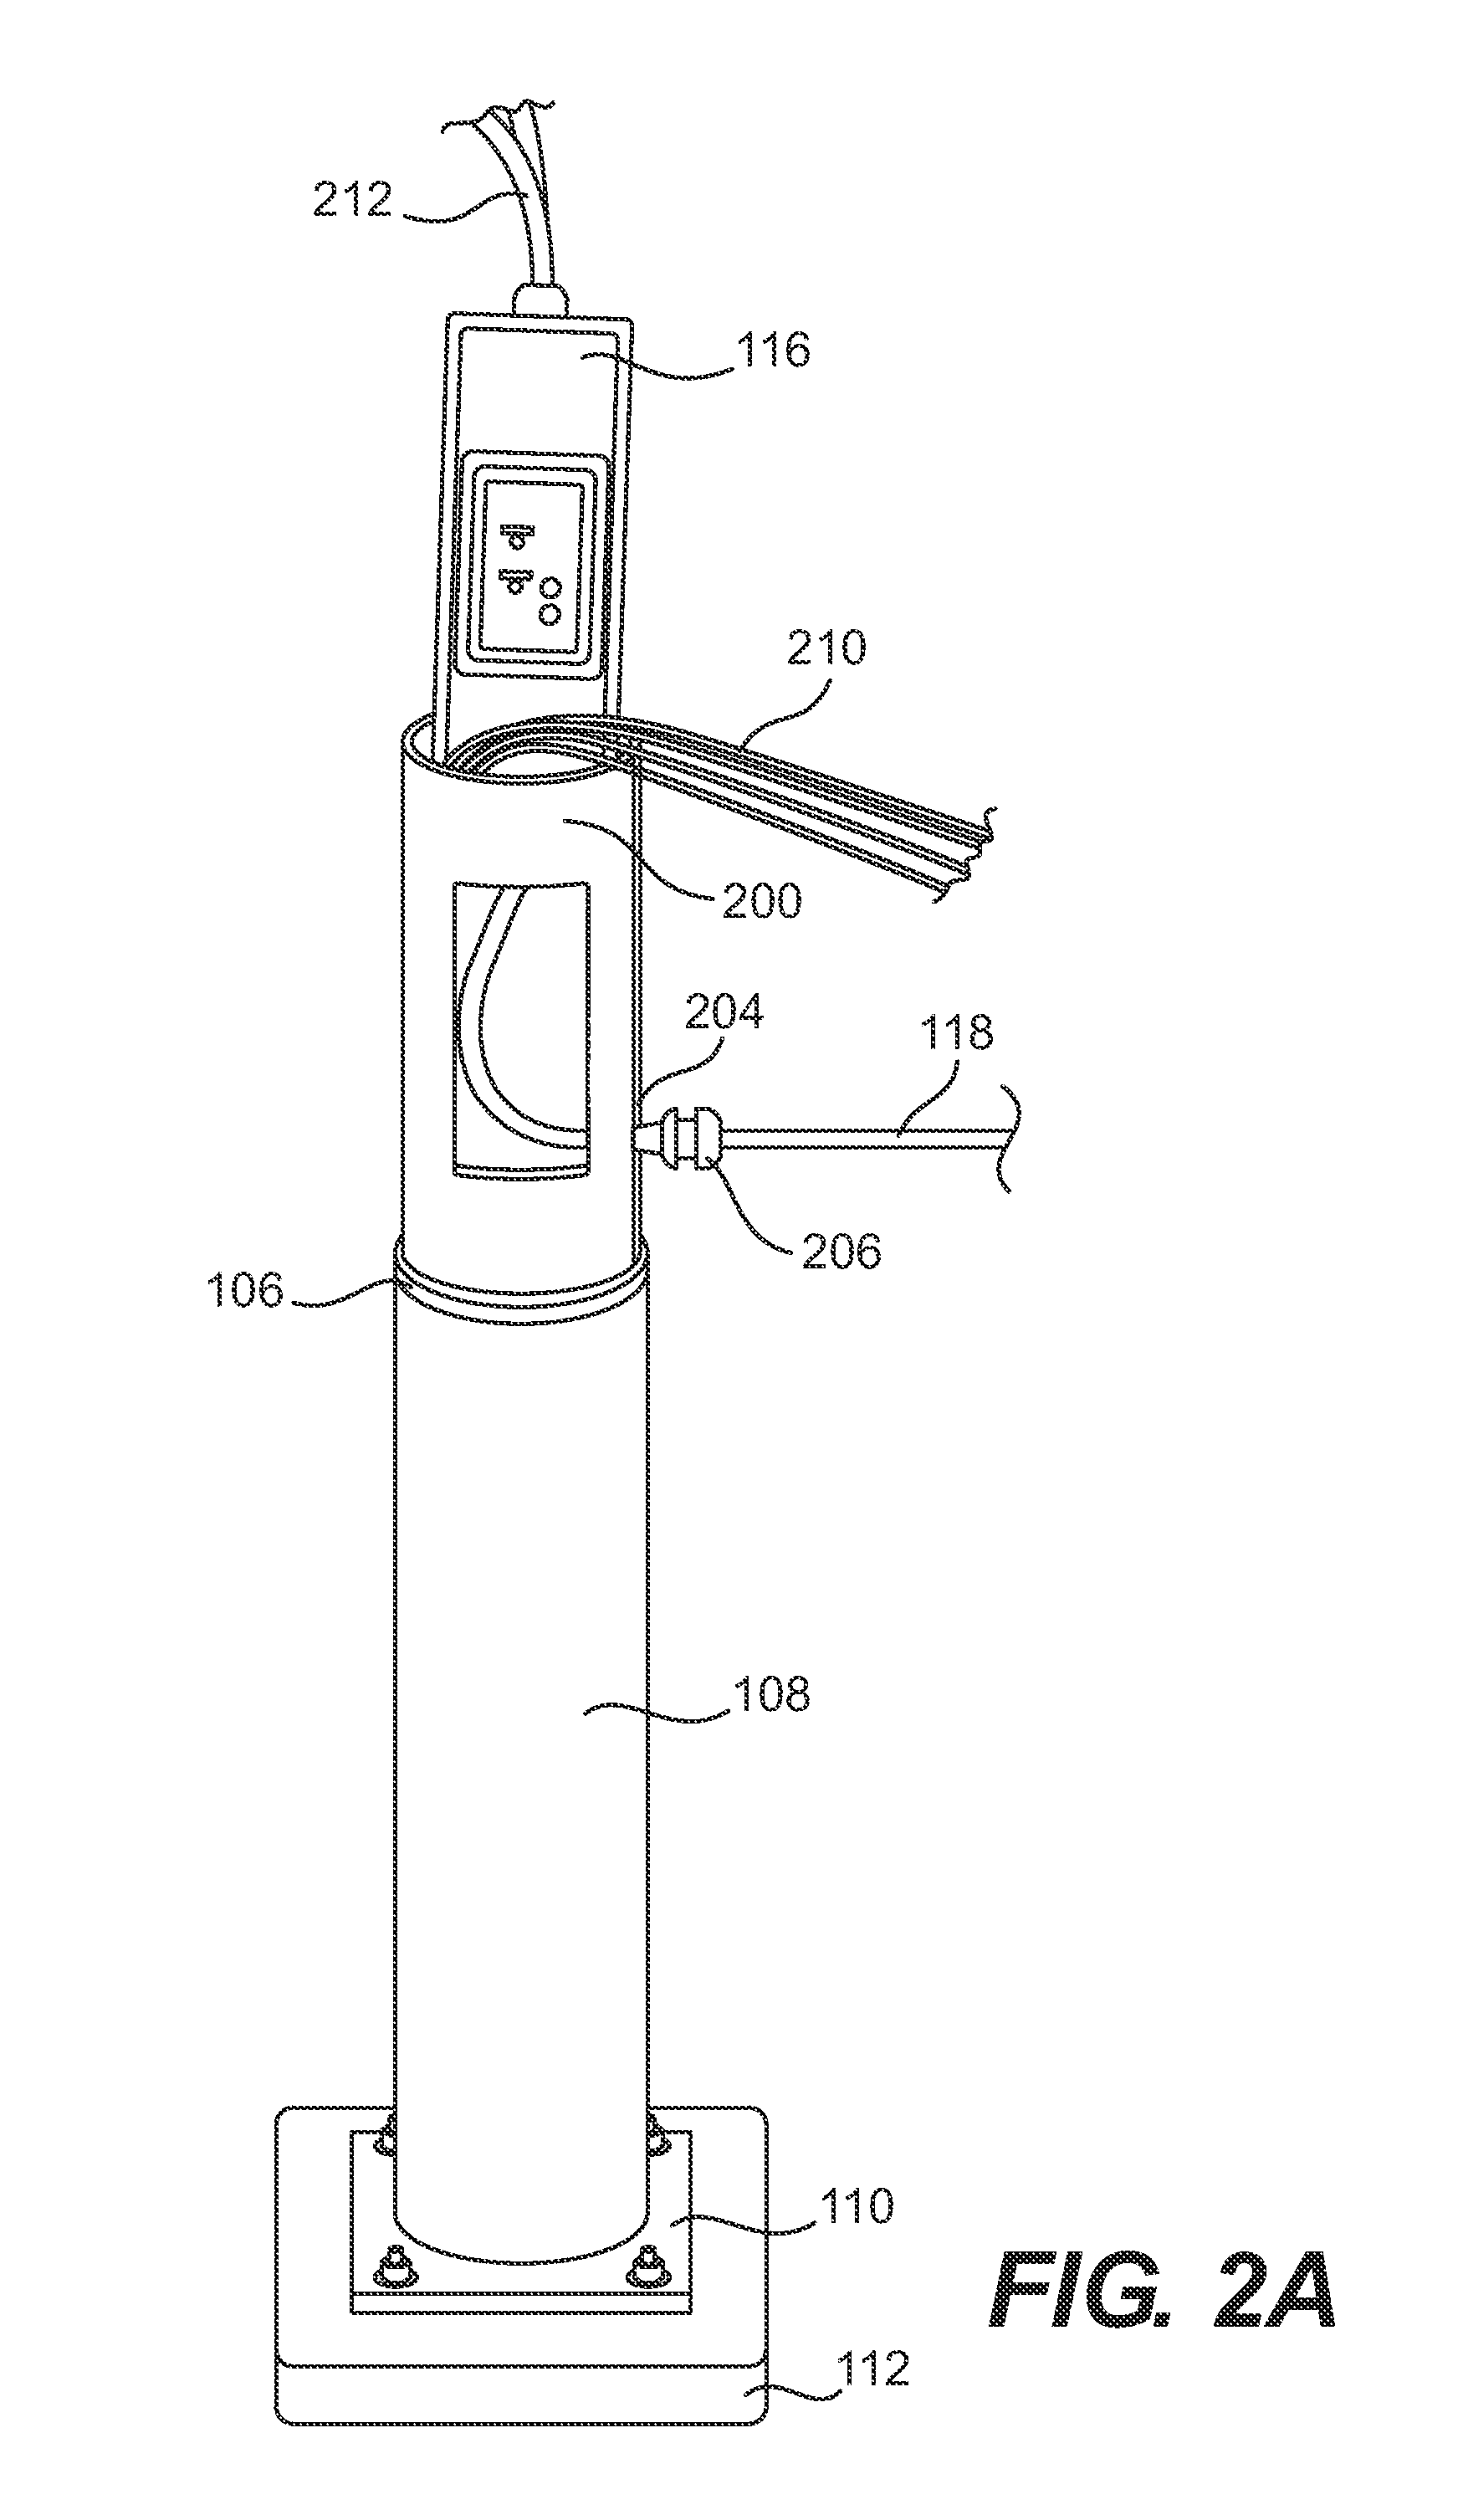 Arrangement and process for housing electric vehicle supply equipment